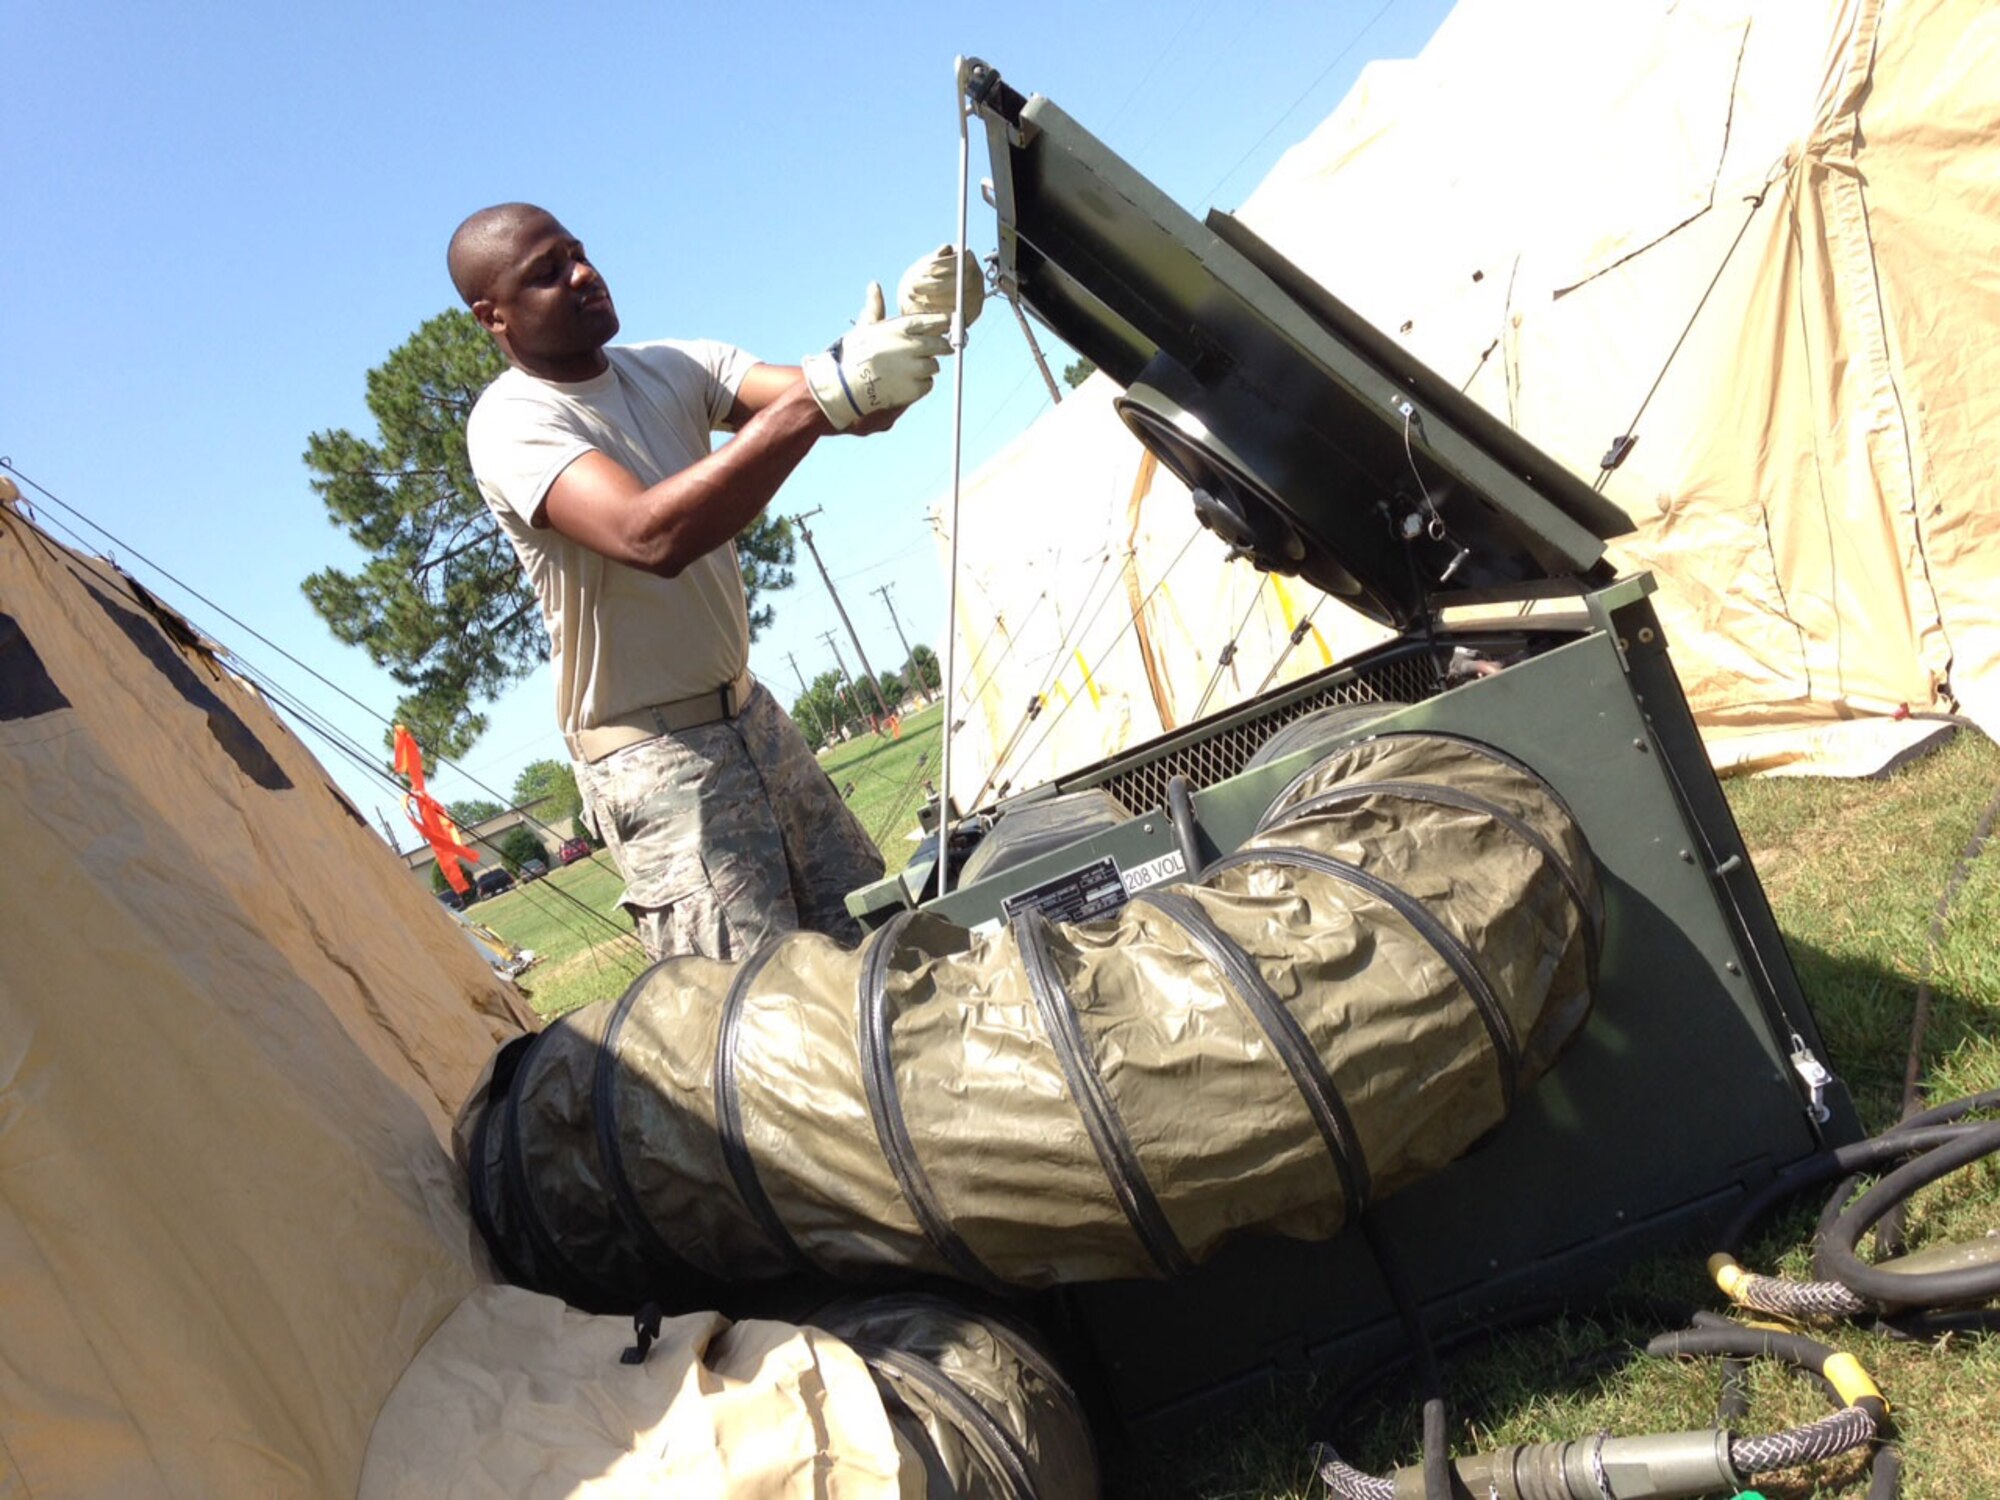 Technical Sgt. Ernest Holston of Sanford, a Heating Ventilation and Air Conditioning (HVAC) technician with the North Carolina Air National Guard's New London-based 263rd Combat Communications Squadron, monitors a critical air conditioning unit during exercise "Medusa Rising" at Seymour Johnson Air Force Base, Goldsboro, N.C. June 15, 2015. HVAC equipment not only cools the unit's people but also the sophisticated communications gear making it essential for mission success. (U.S. Air Force photo by Lt. Col. Robert Carver, North Carolina Air National Guard Public Affairs/Released)